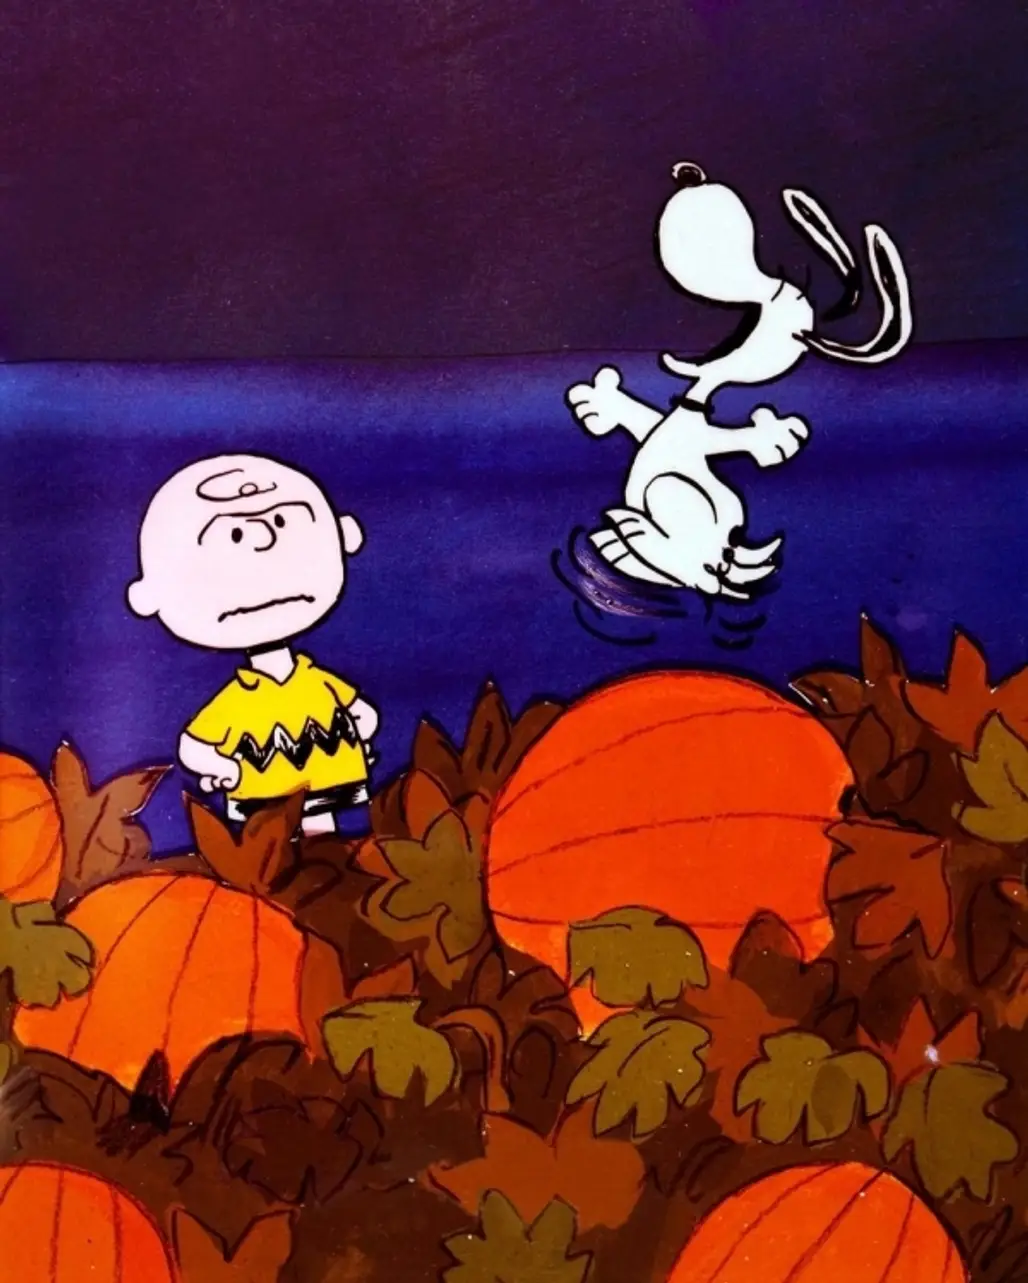 Peanuts Created the Halloween We Know Today